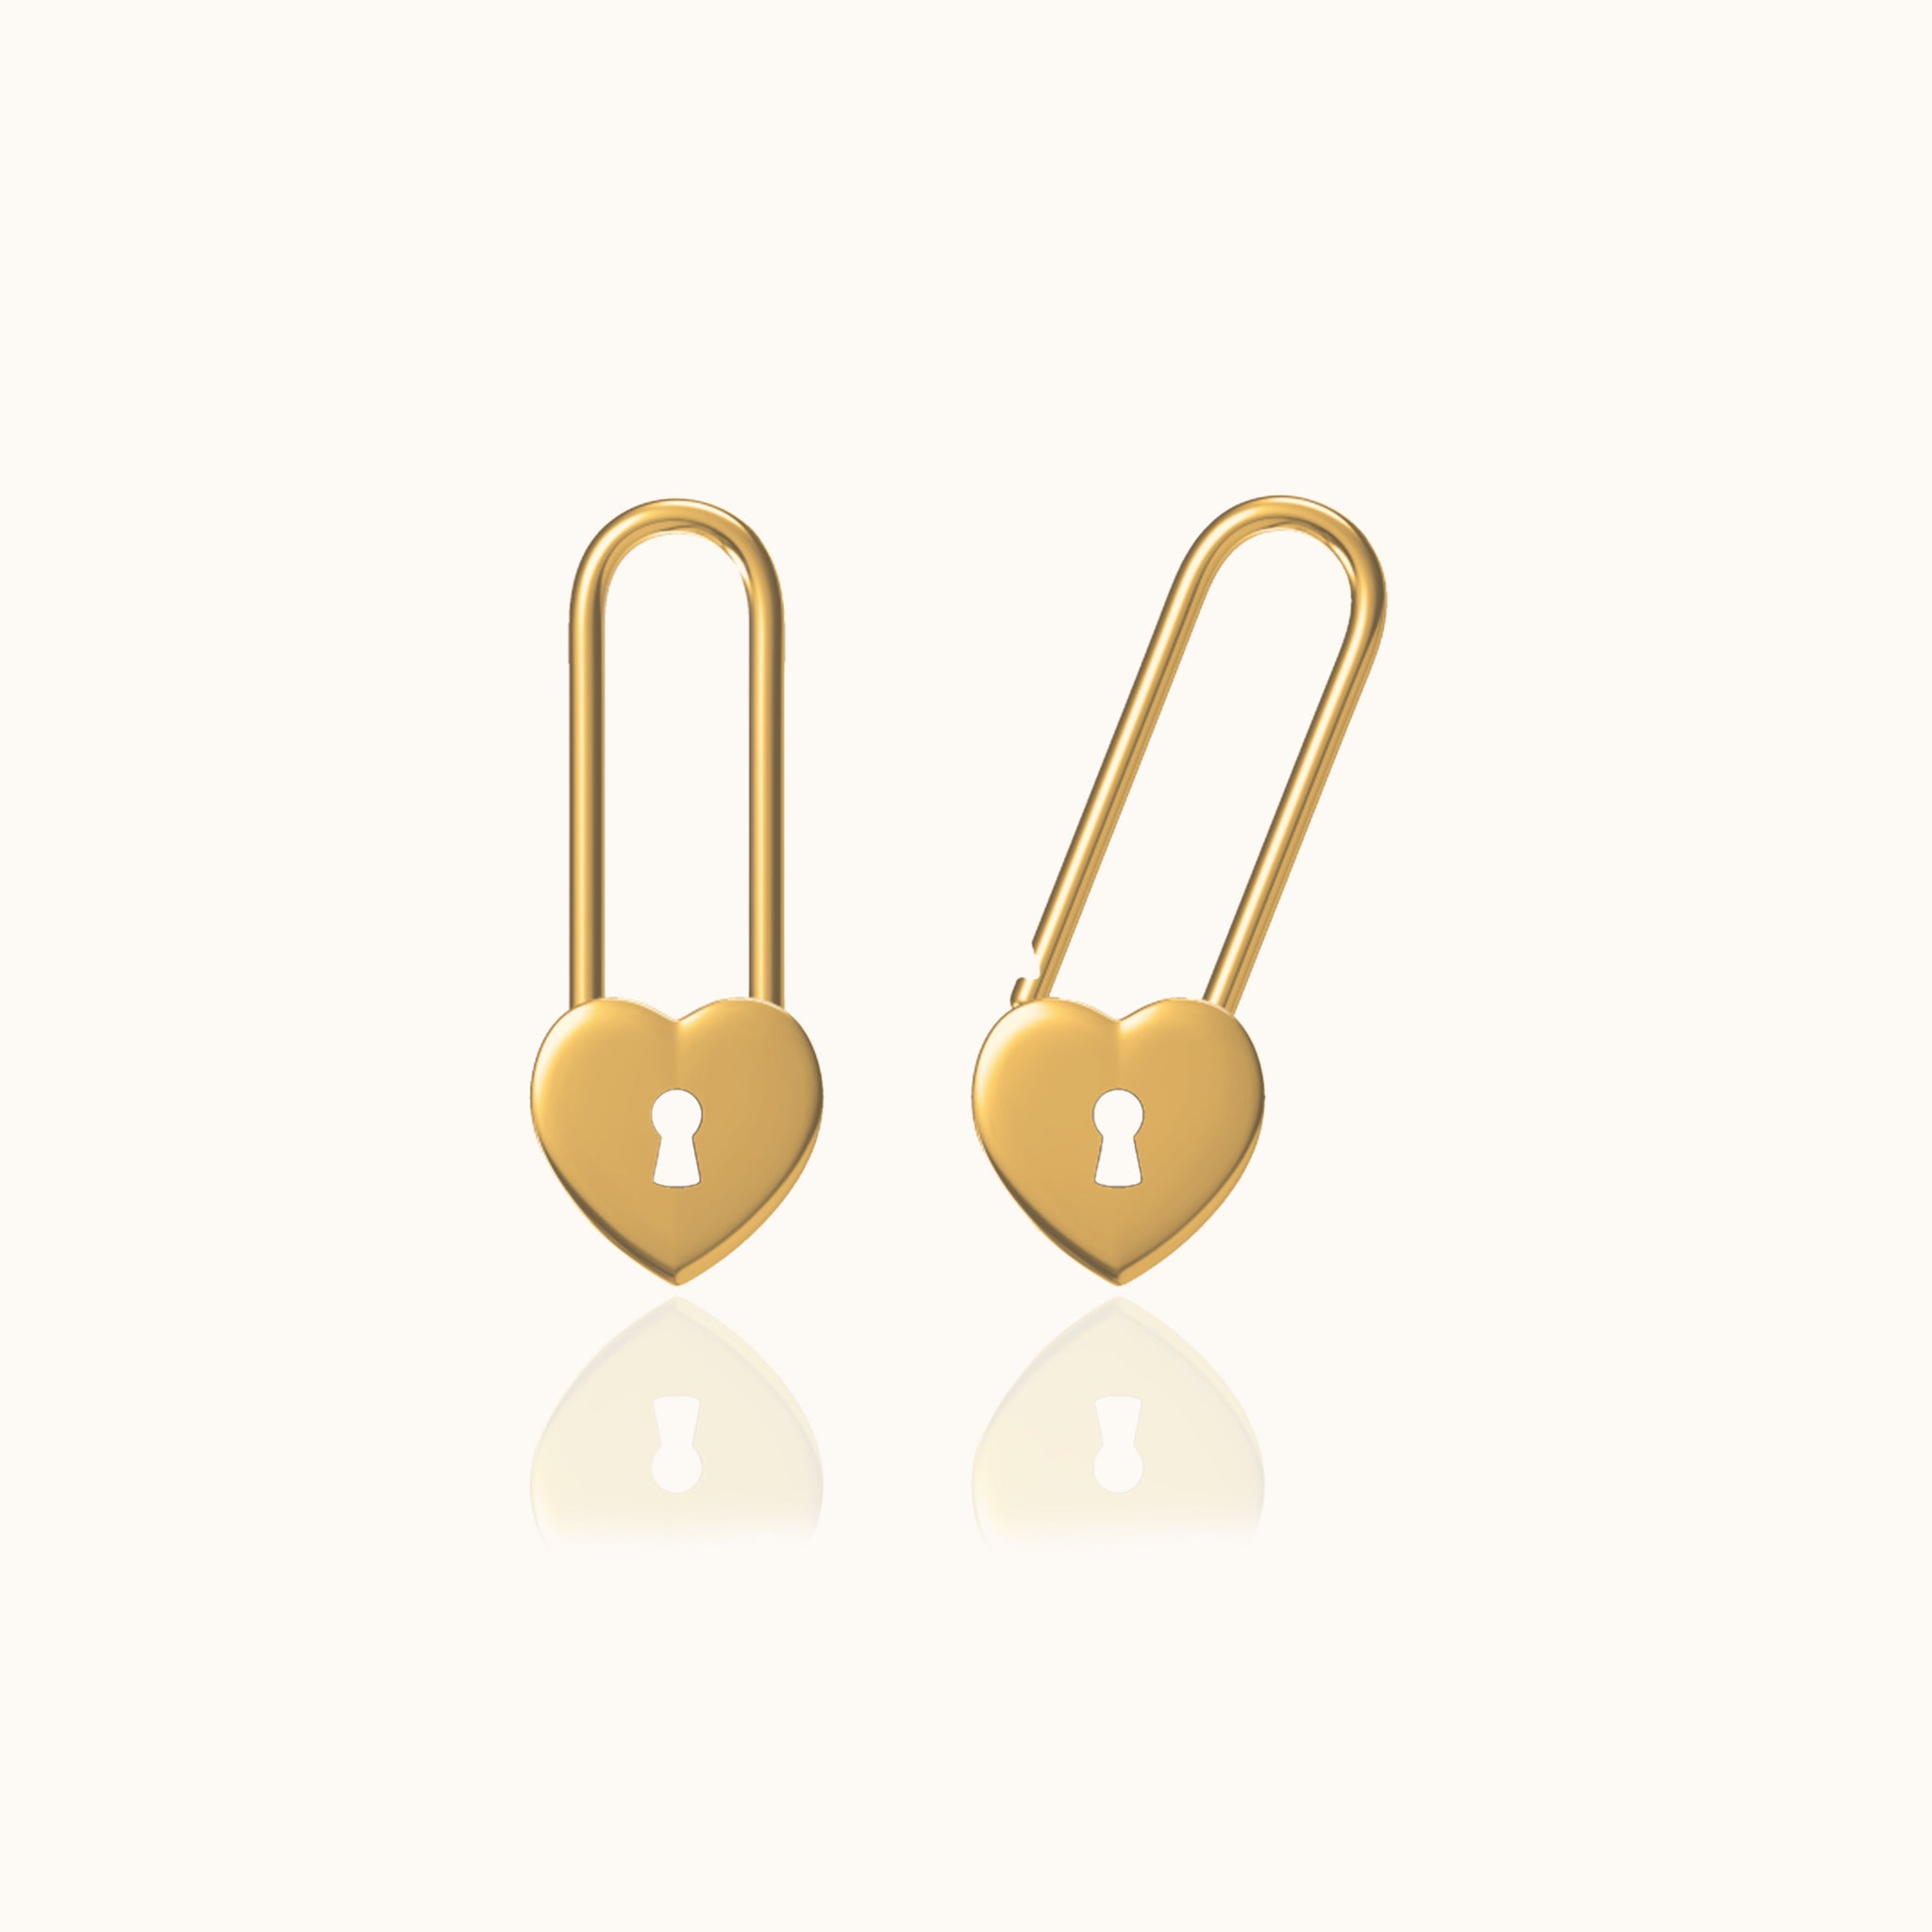 Love Lock 18K Gold High Polished Pin Drop Heart Safety Pin Earrings by Doviana